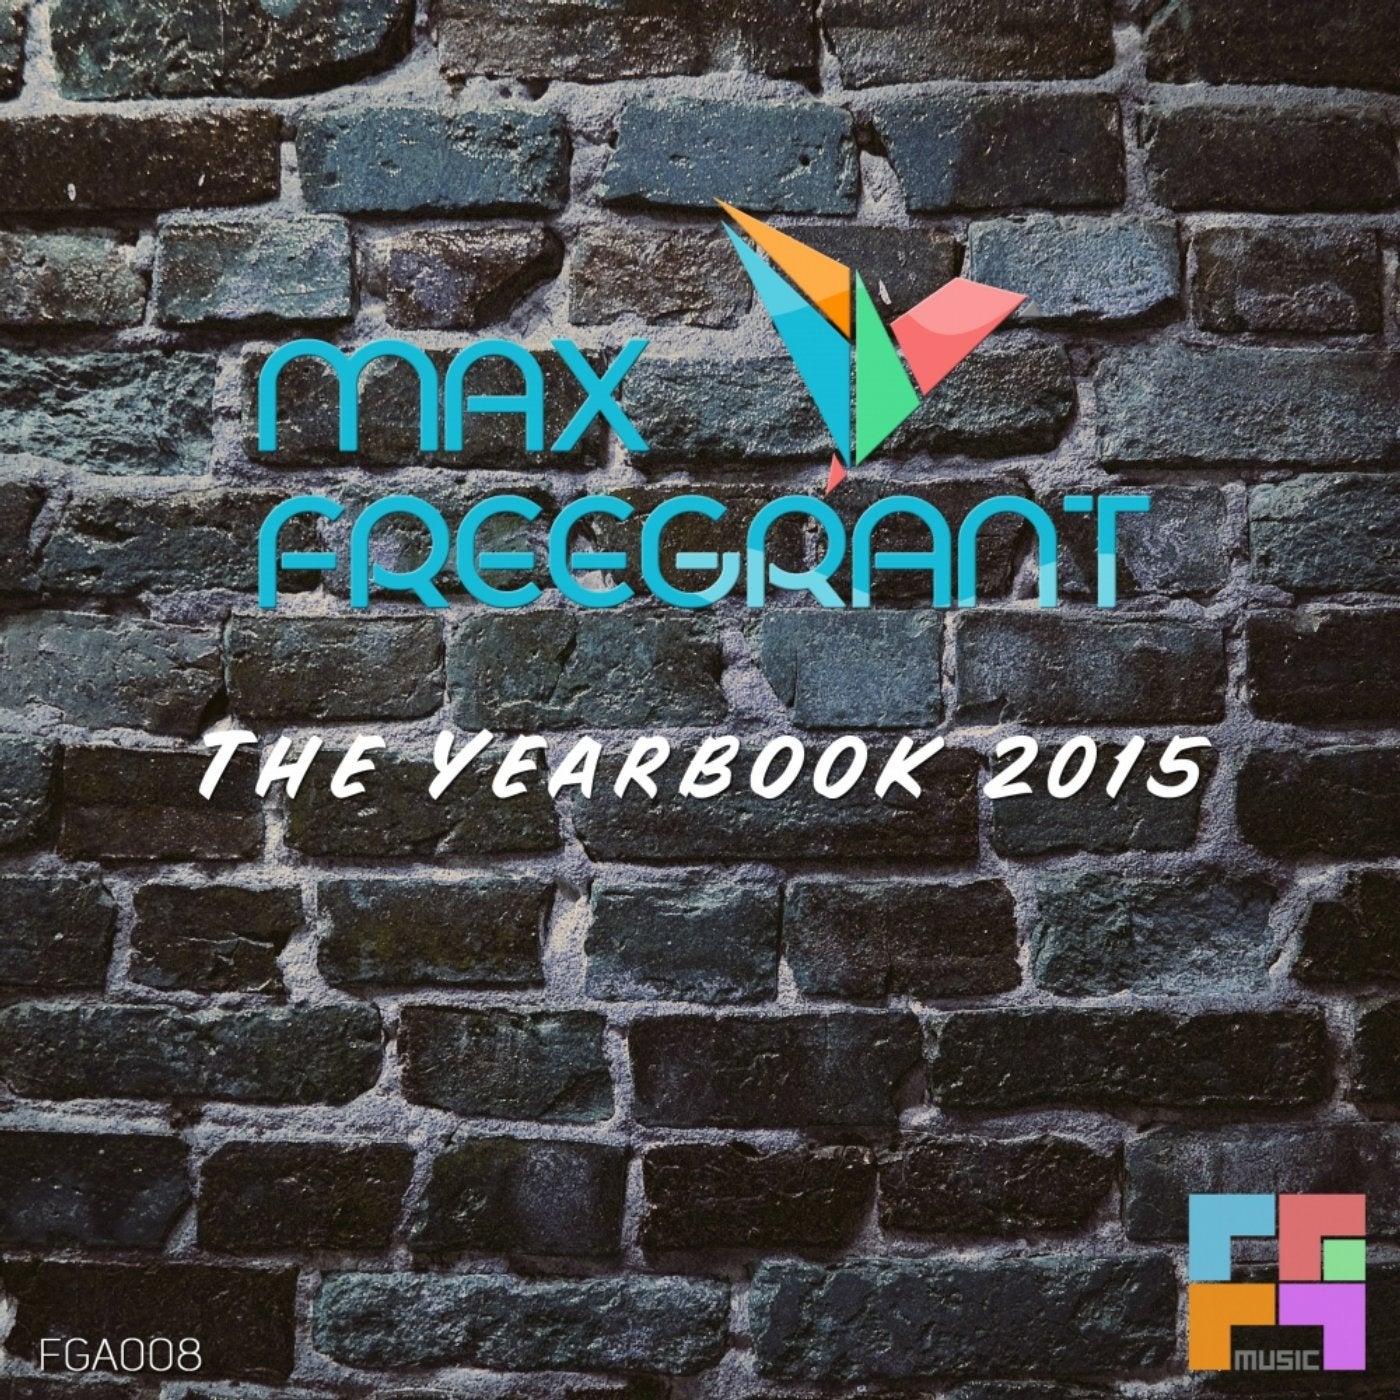 The Yearbook 2015